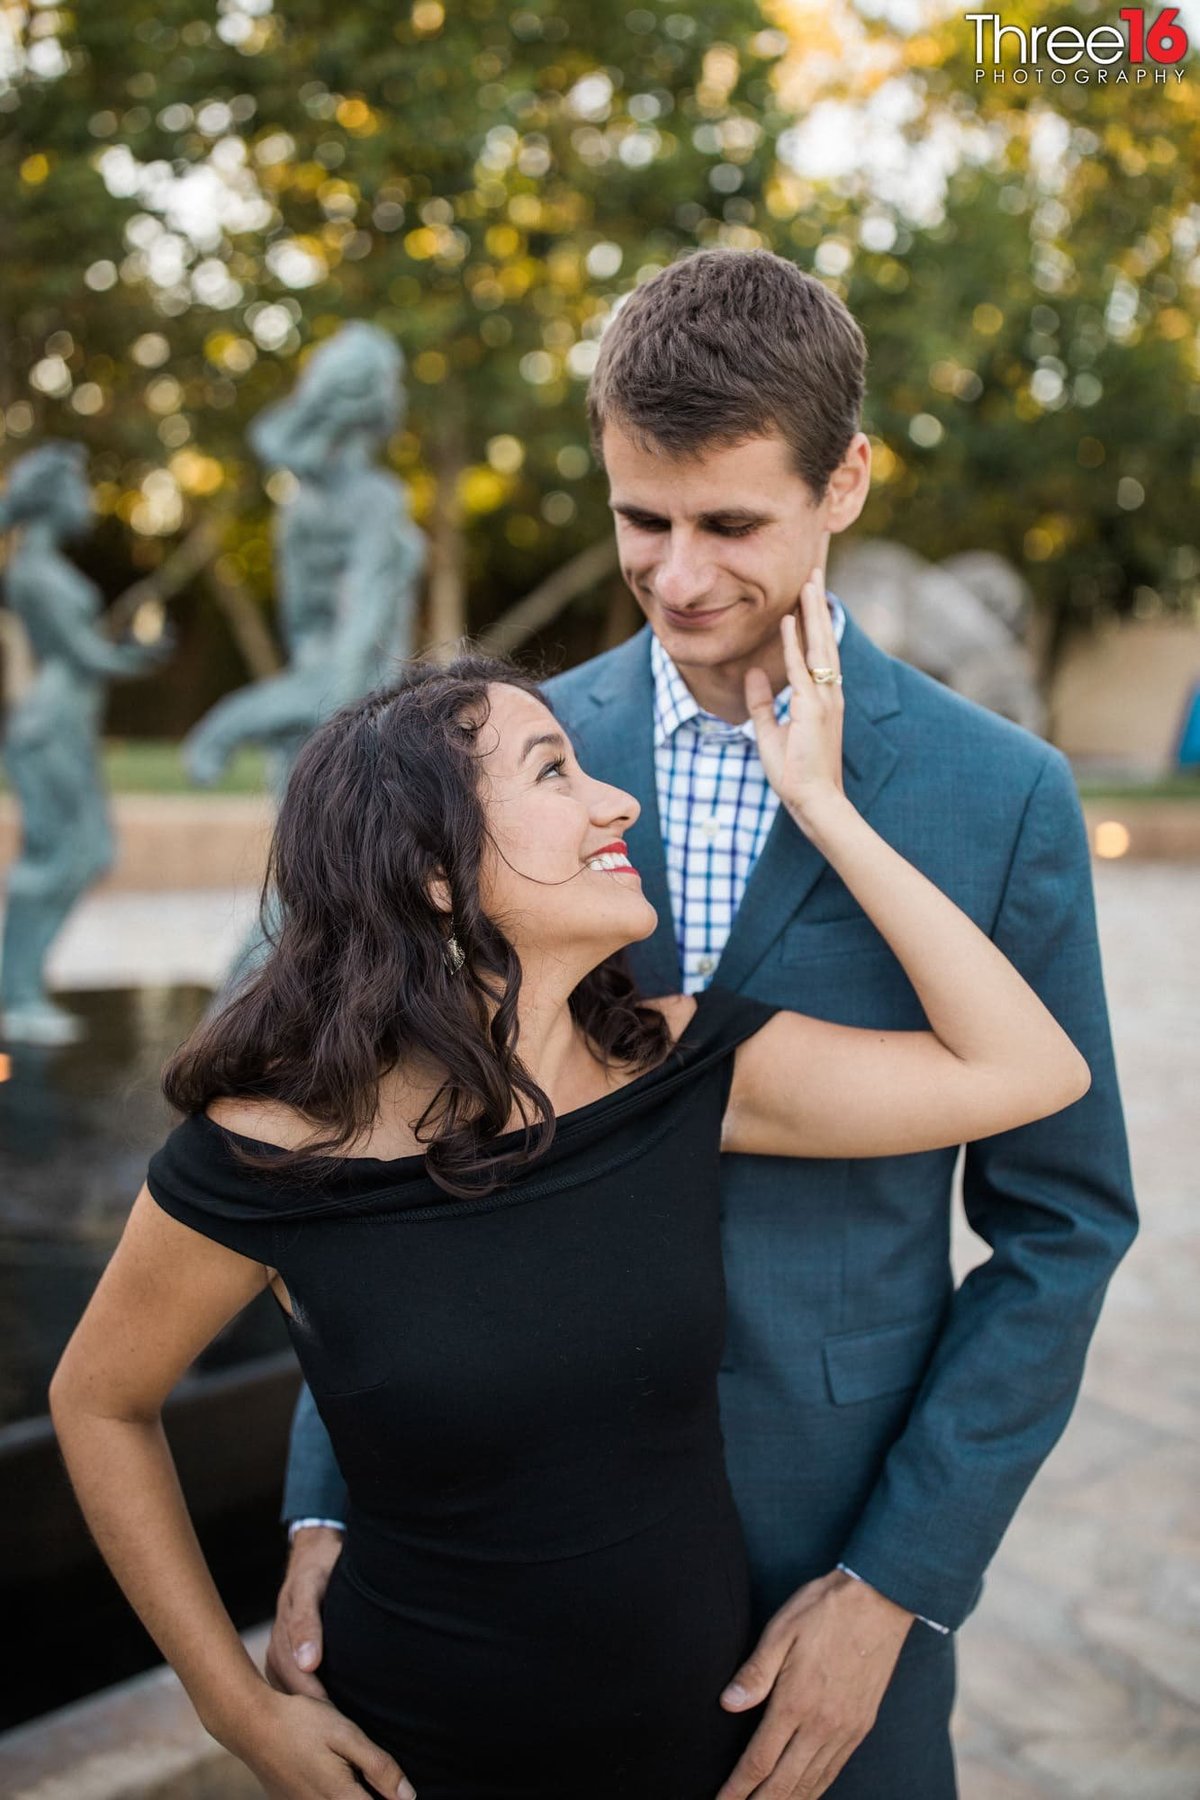 Groom to be holds his Bride's hips from behind as she looks up at him and smiles during an engagement photo shoot